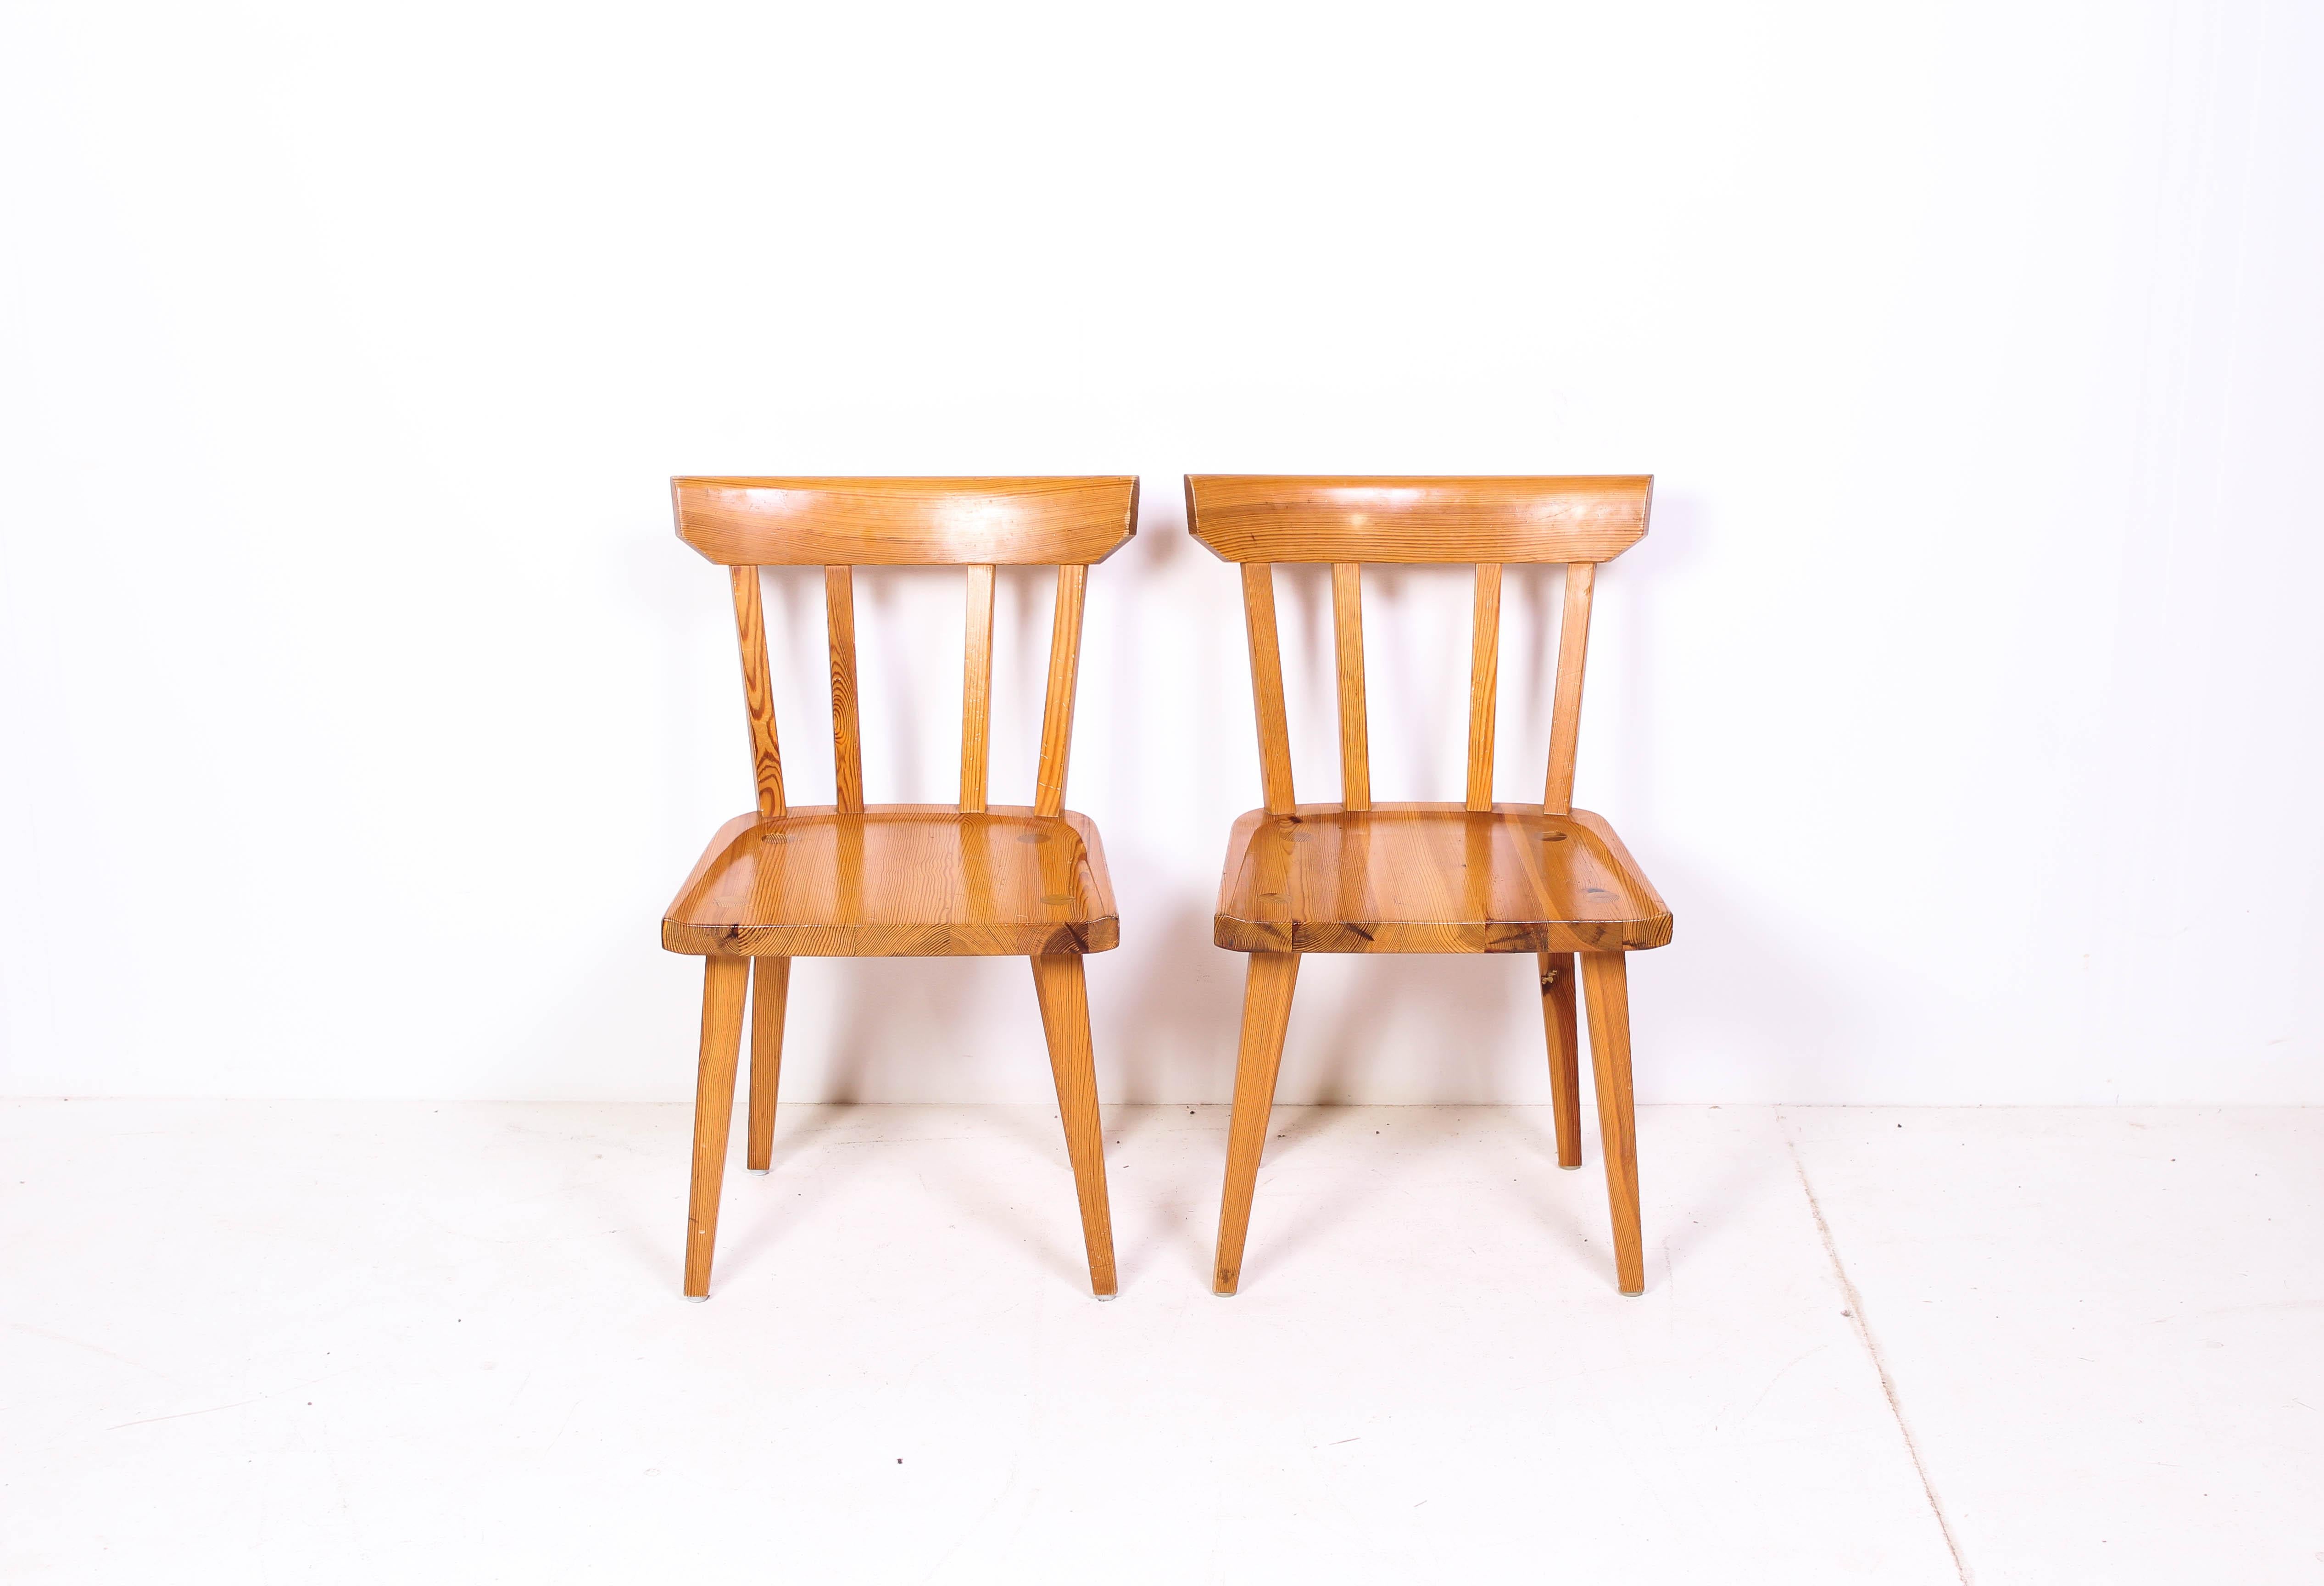 A pair of midcentury pine dining chairs by Karl Andersson & Söner from the 1960s. The design is by Carl Malmsten. Great craftsmanship. Very good vintage condition with signs of usage consistent with age.